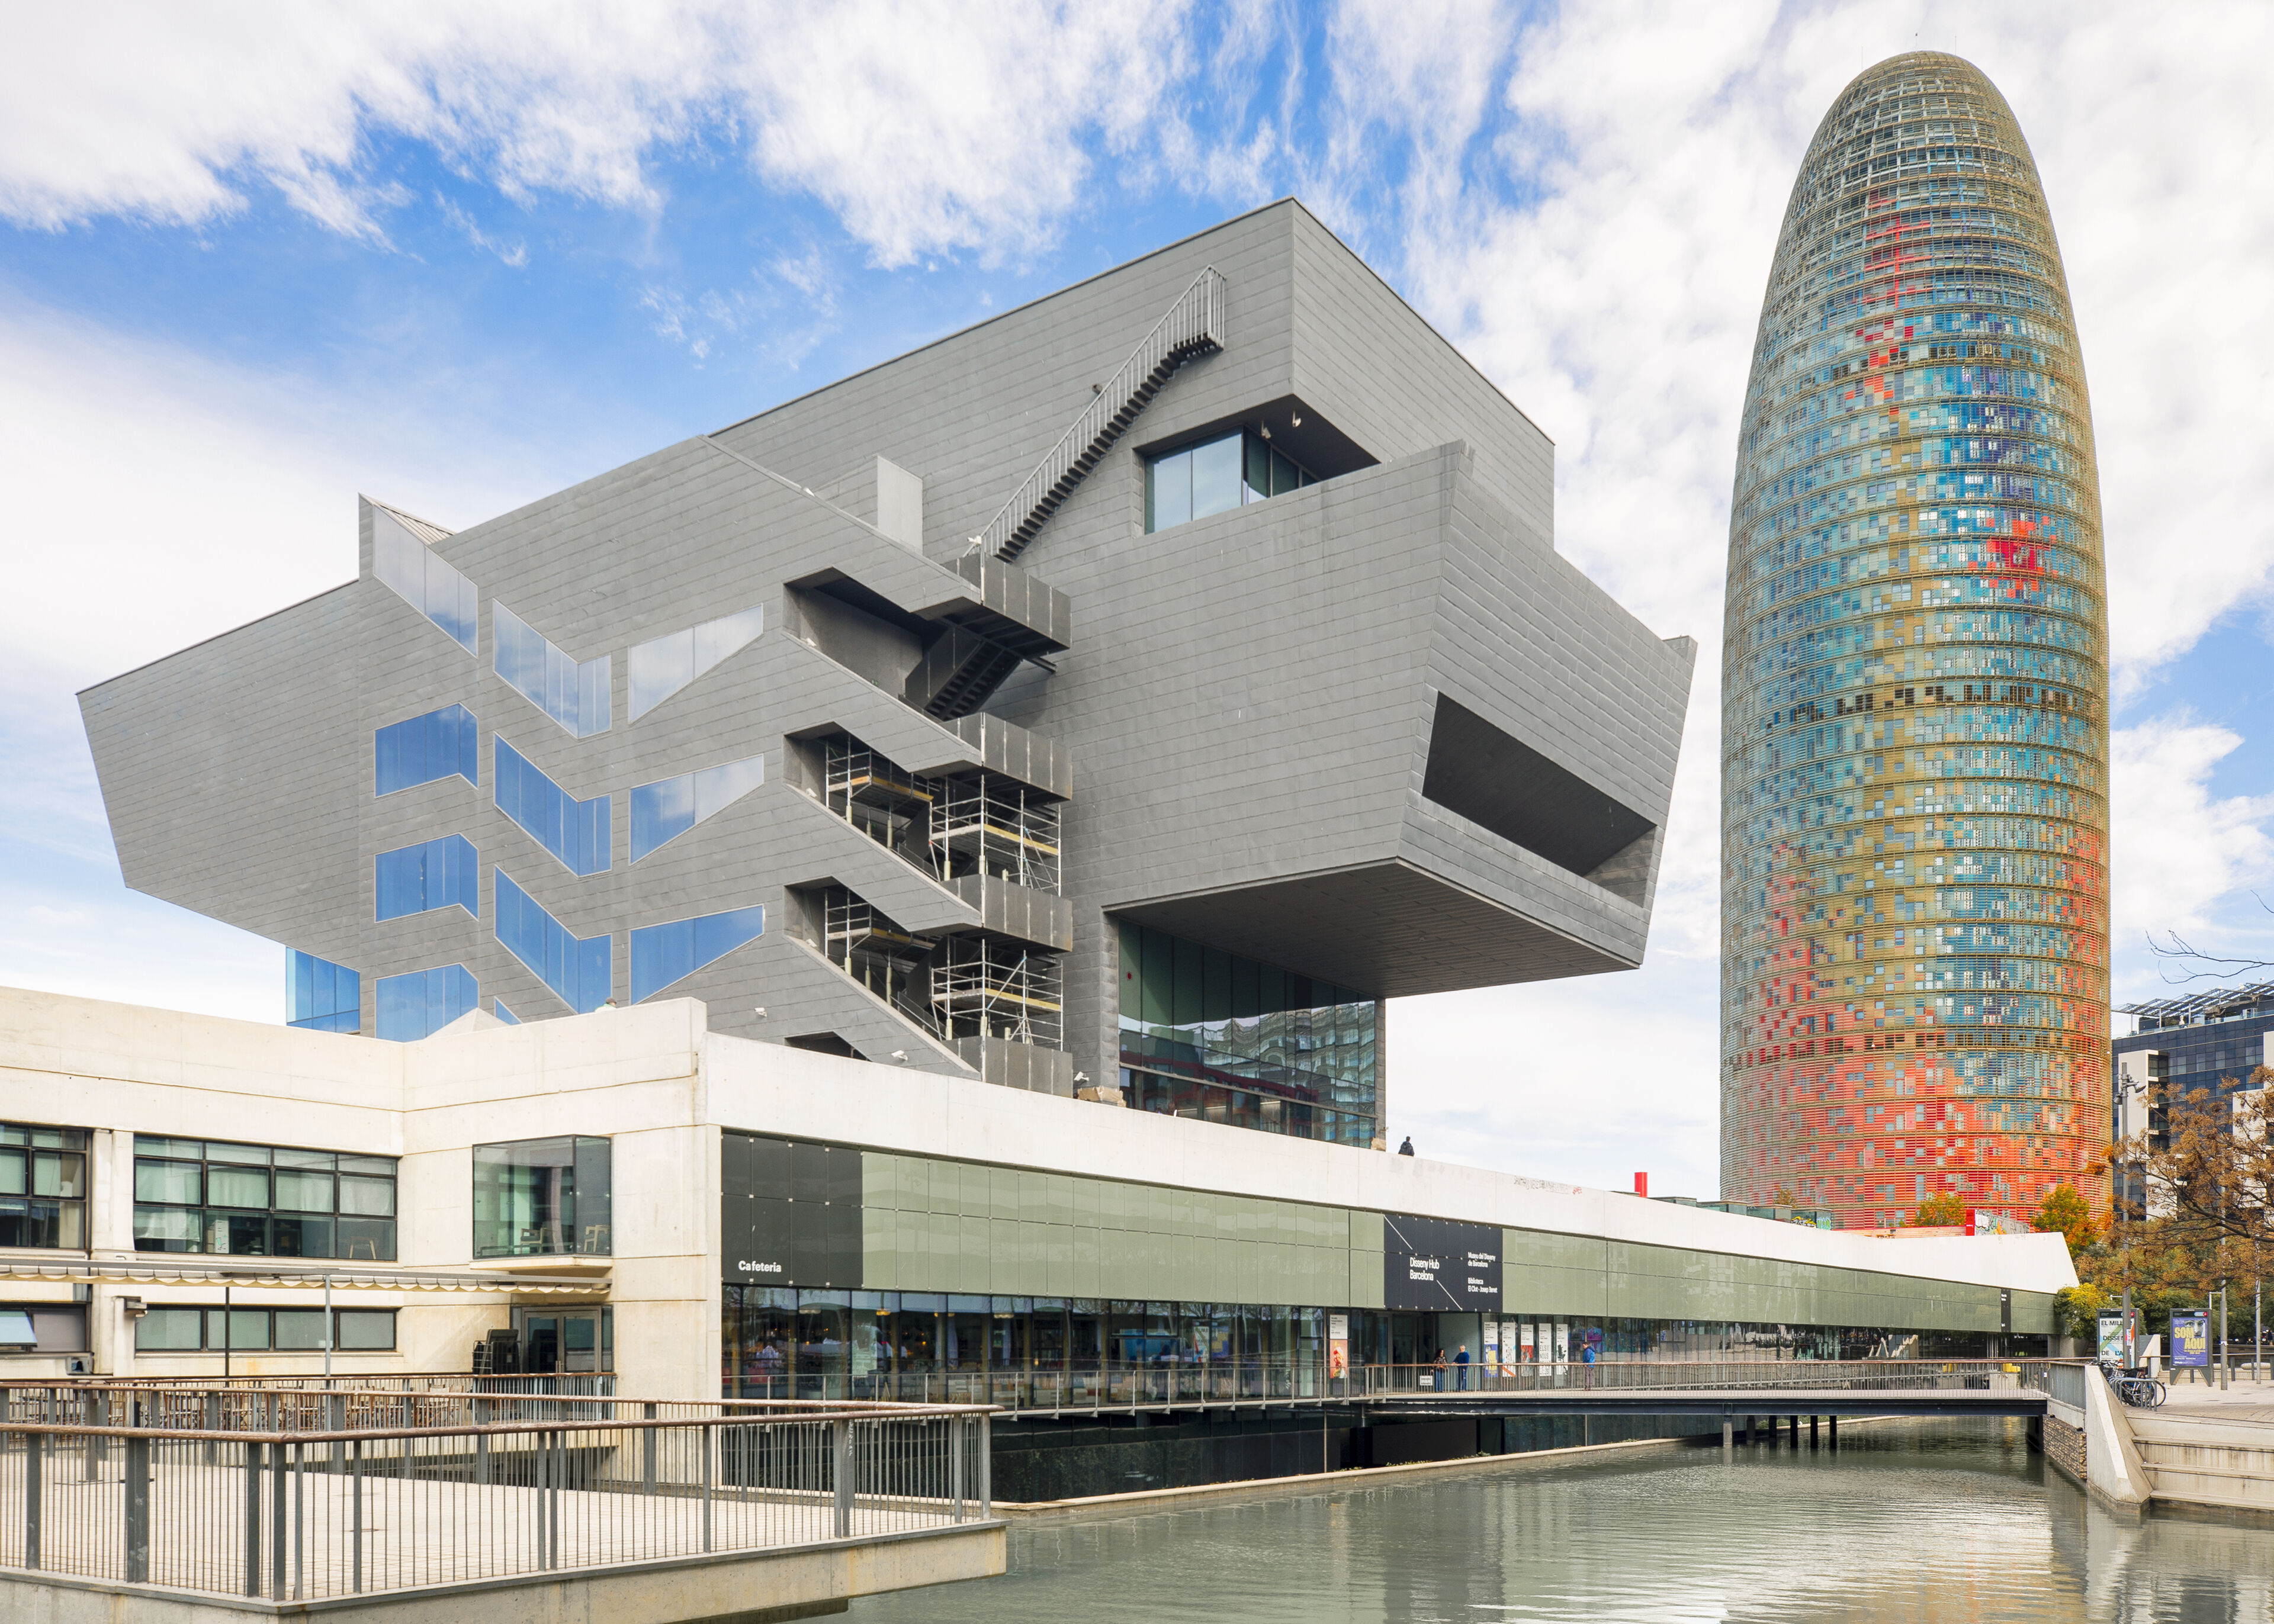 An avant-garde building in Barcelona juxtaposed with the colorful Torre Glòries, showcasing Spain's contemporary architectural landscape.